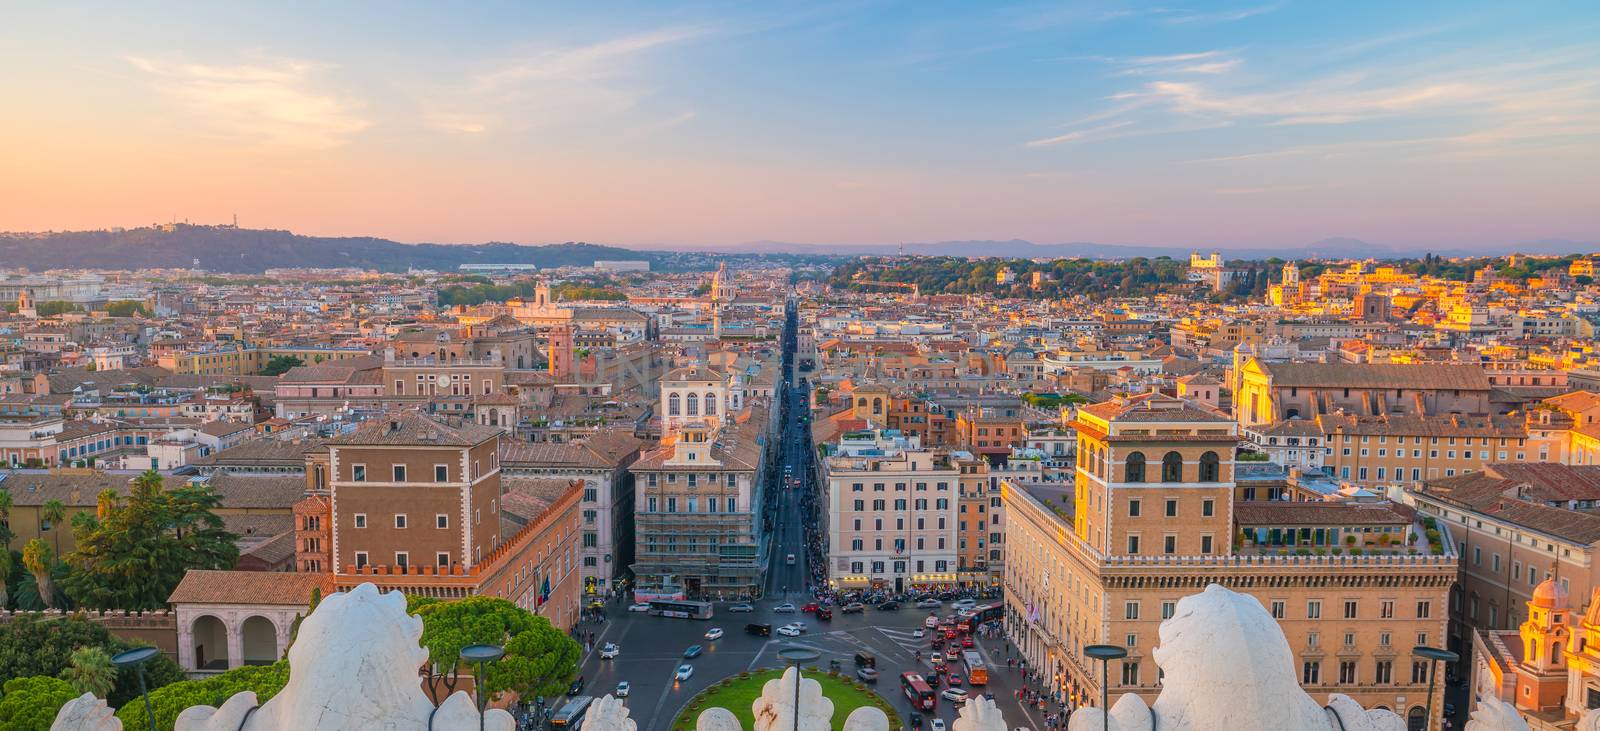 View of old town Rome skyline in Italy at sunset